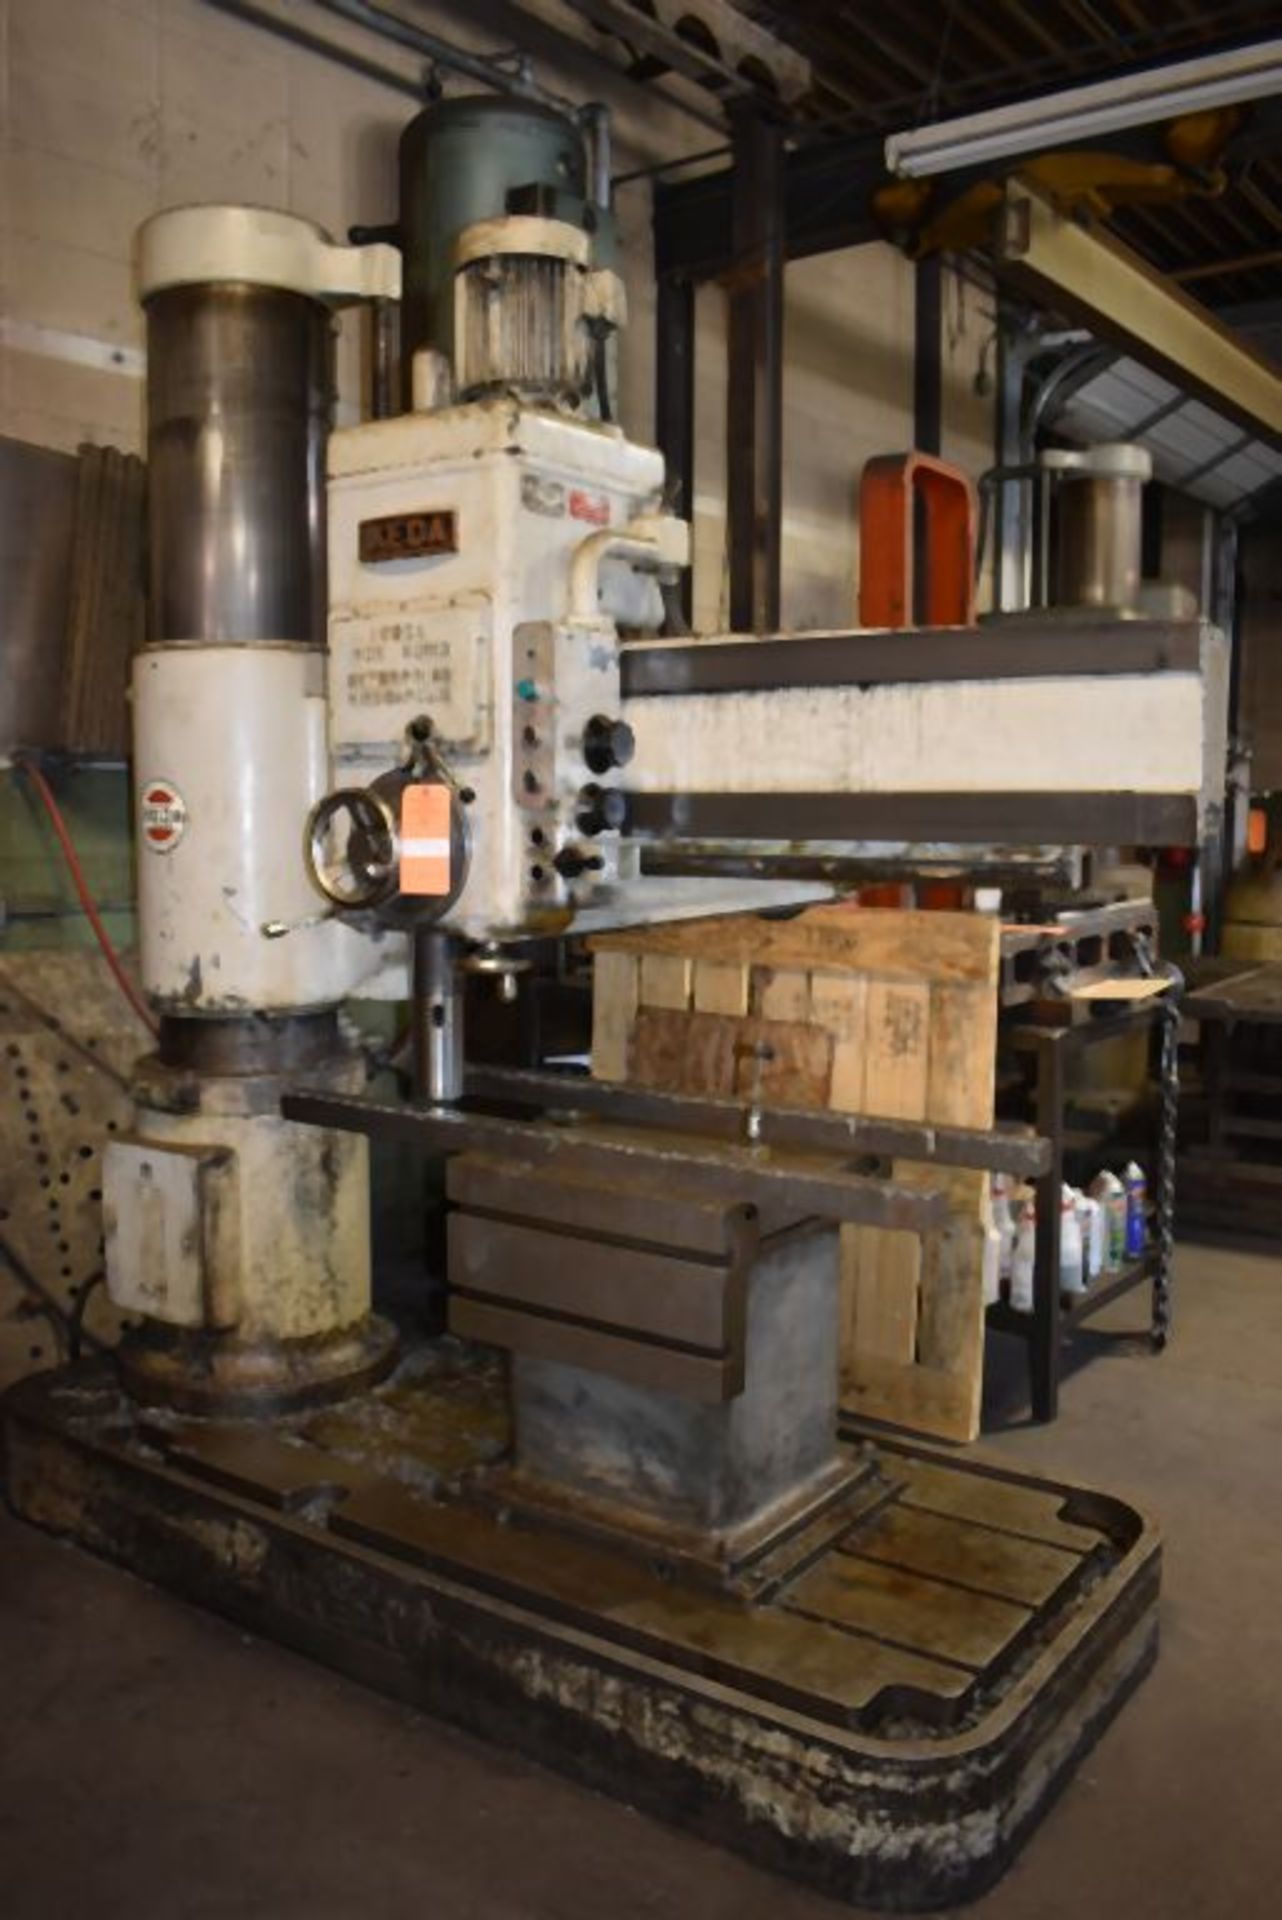 1975 IKEDA RADIAL ARM DRILL, MODEL RM-1300, S/N: 74331, 13" COLUMN x 60" ARM, 20" x 20" T-SLOT 90 - Image 2 of 3